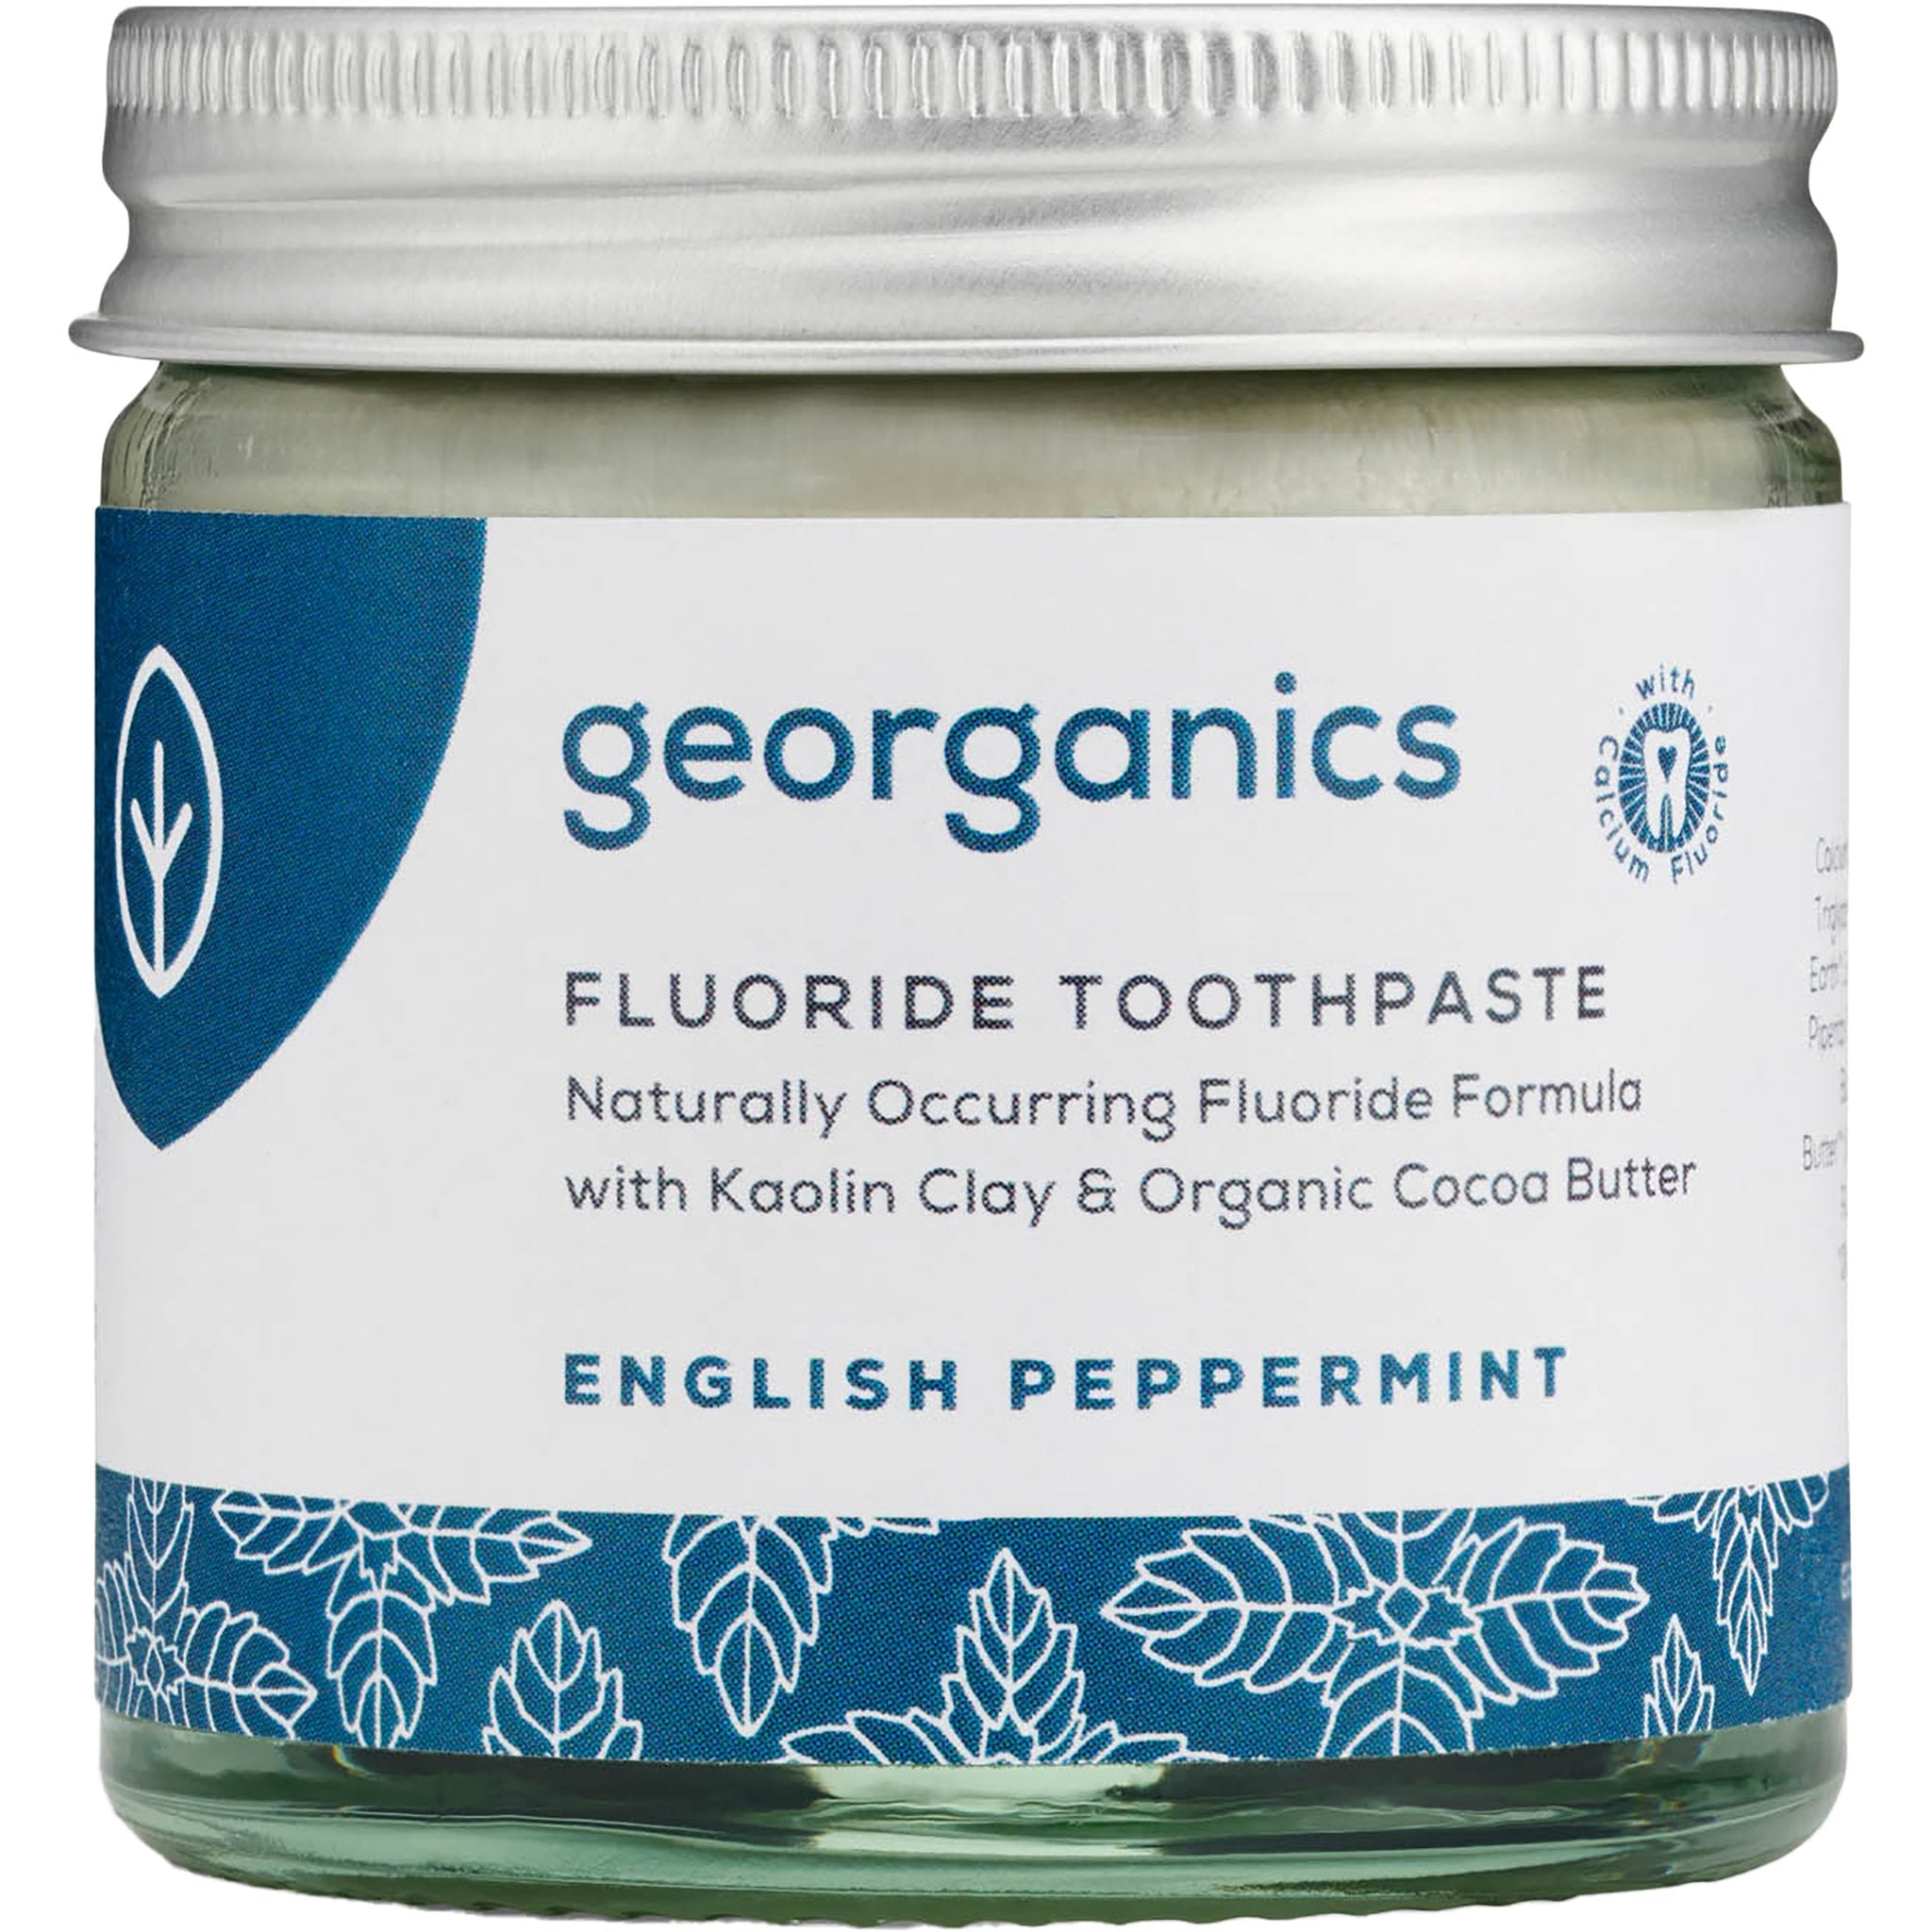 Fluoride Toothpaste | Peppermint - mypure.co.uk